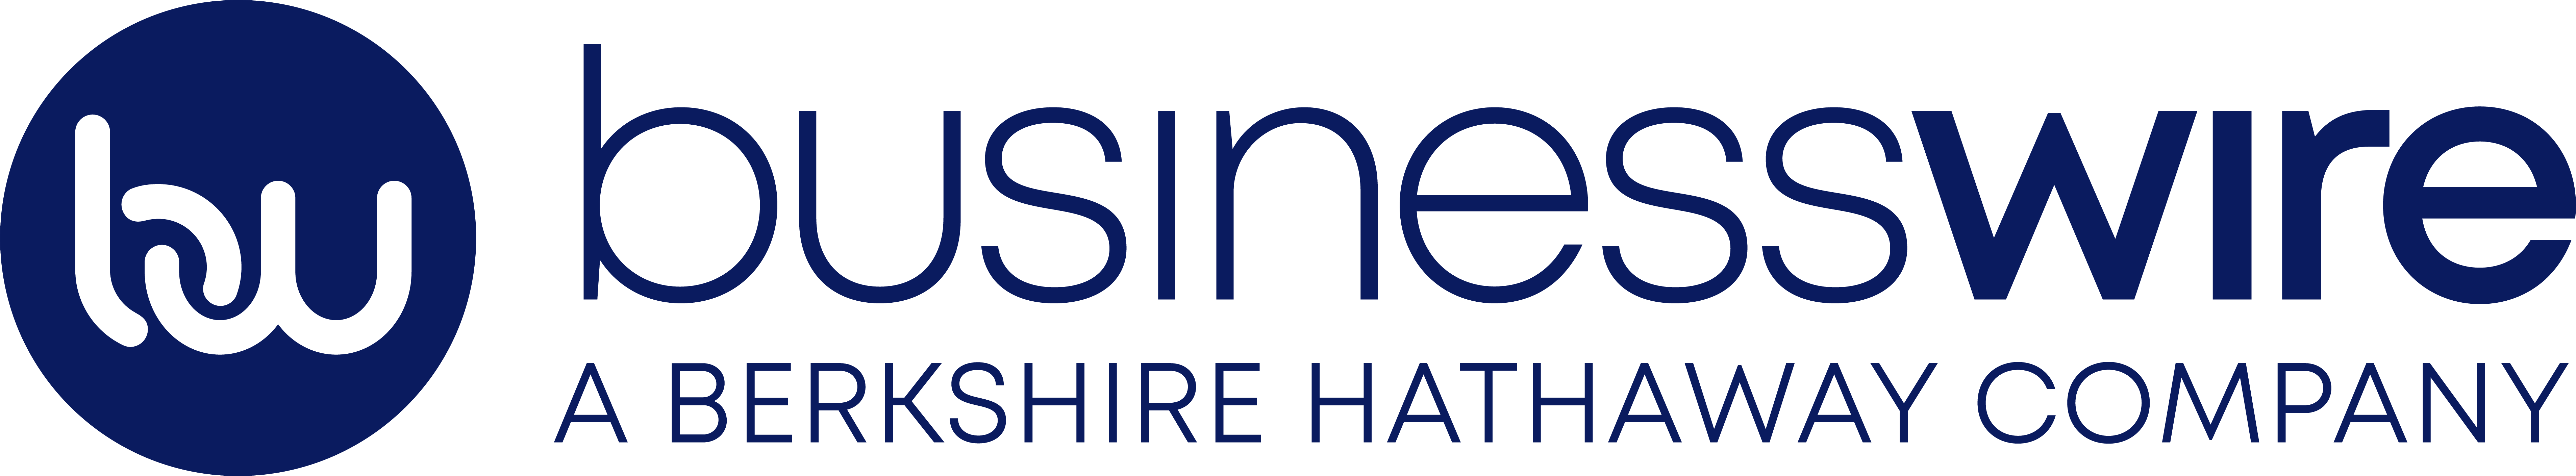 https://www.williamcollis.com/wp-content/uploads/2020/07/Business-Wire-Logo-Small-Navy-7625x1409.png